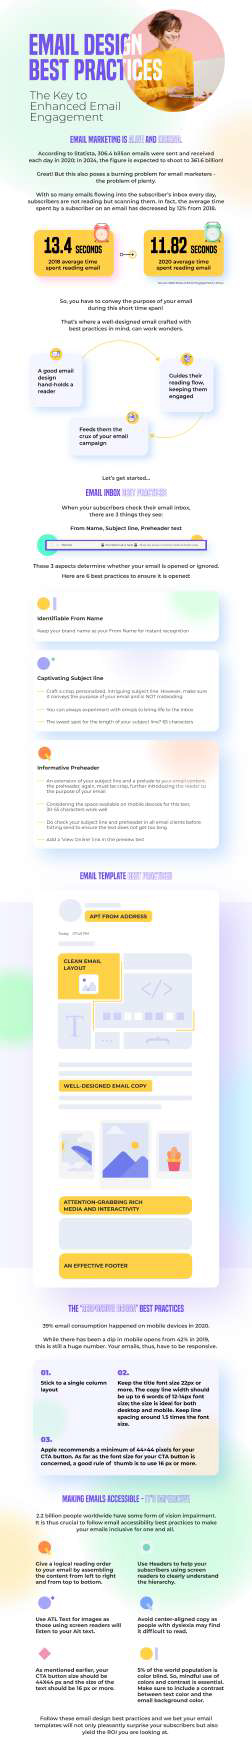 email design best practices infographic